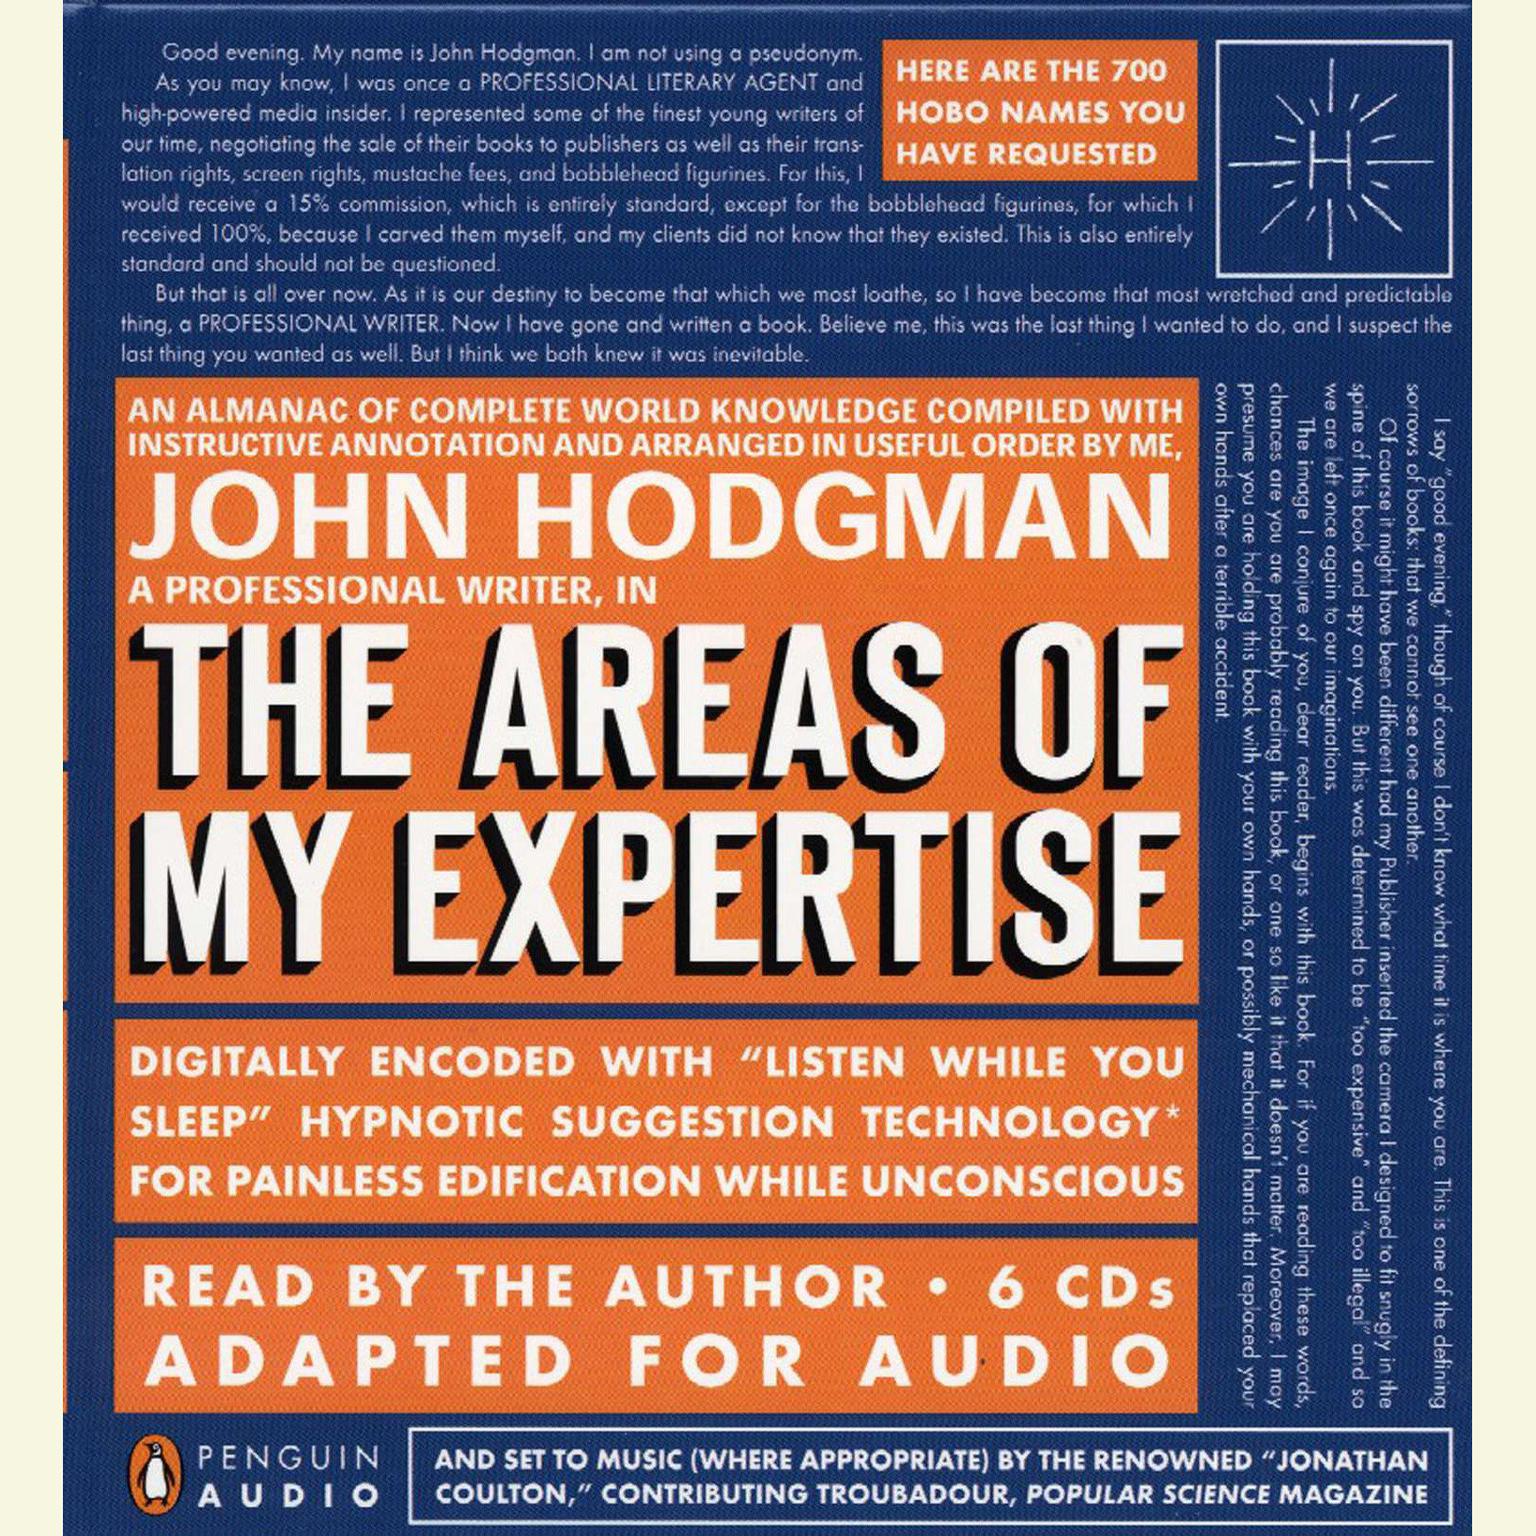 The Areas of My Expertise (Abridged): An Almanac of Complete World Knowledge Compiled with Instructive Annotation and Arranged in Useful Order Audiobook, by John Hodgman